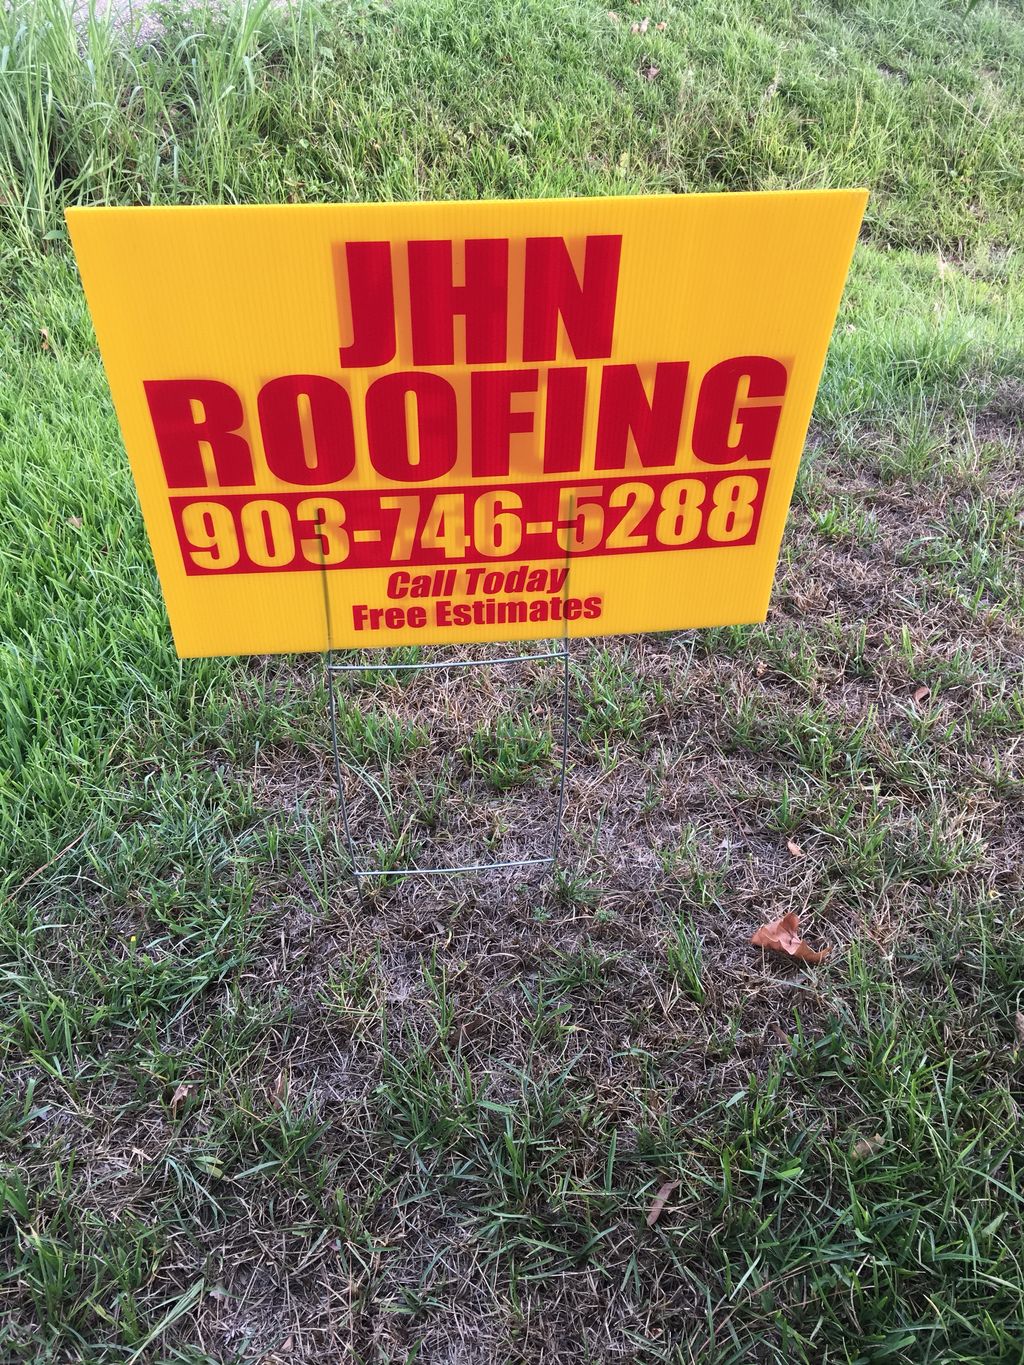 JHN Roofing & Construction